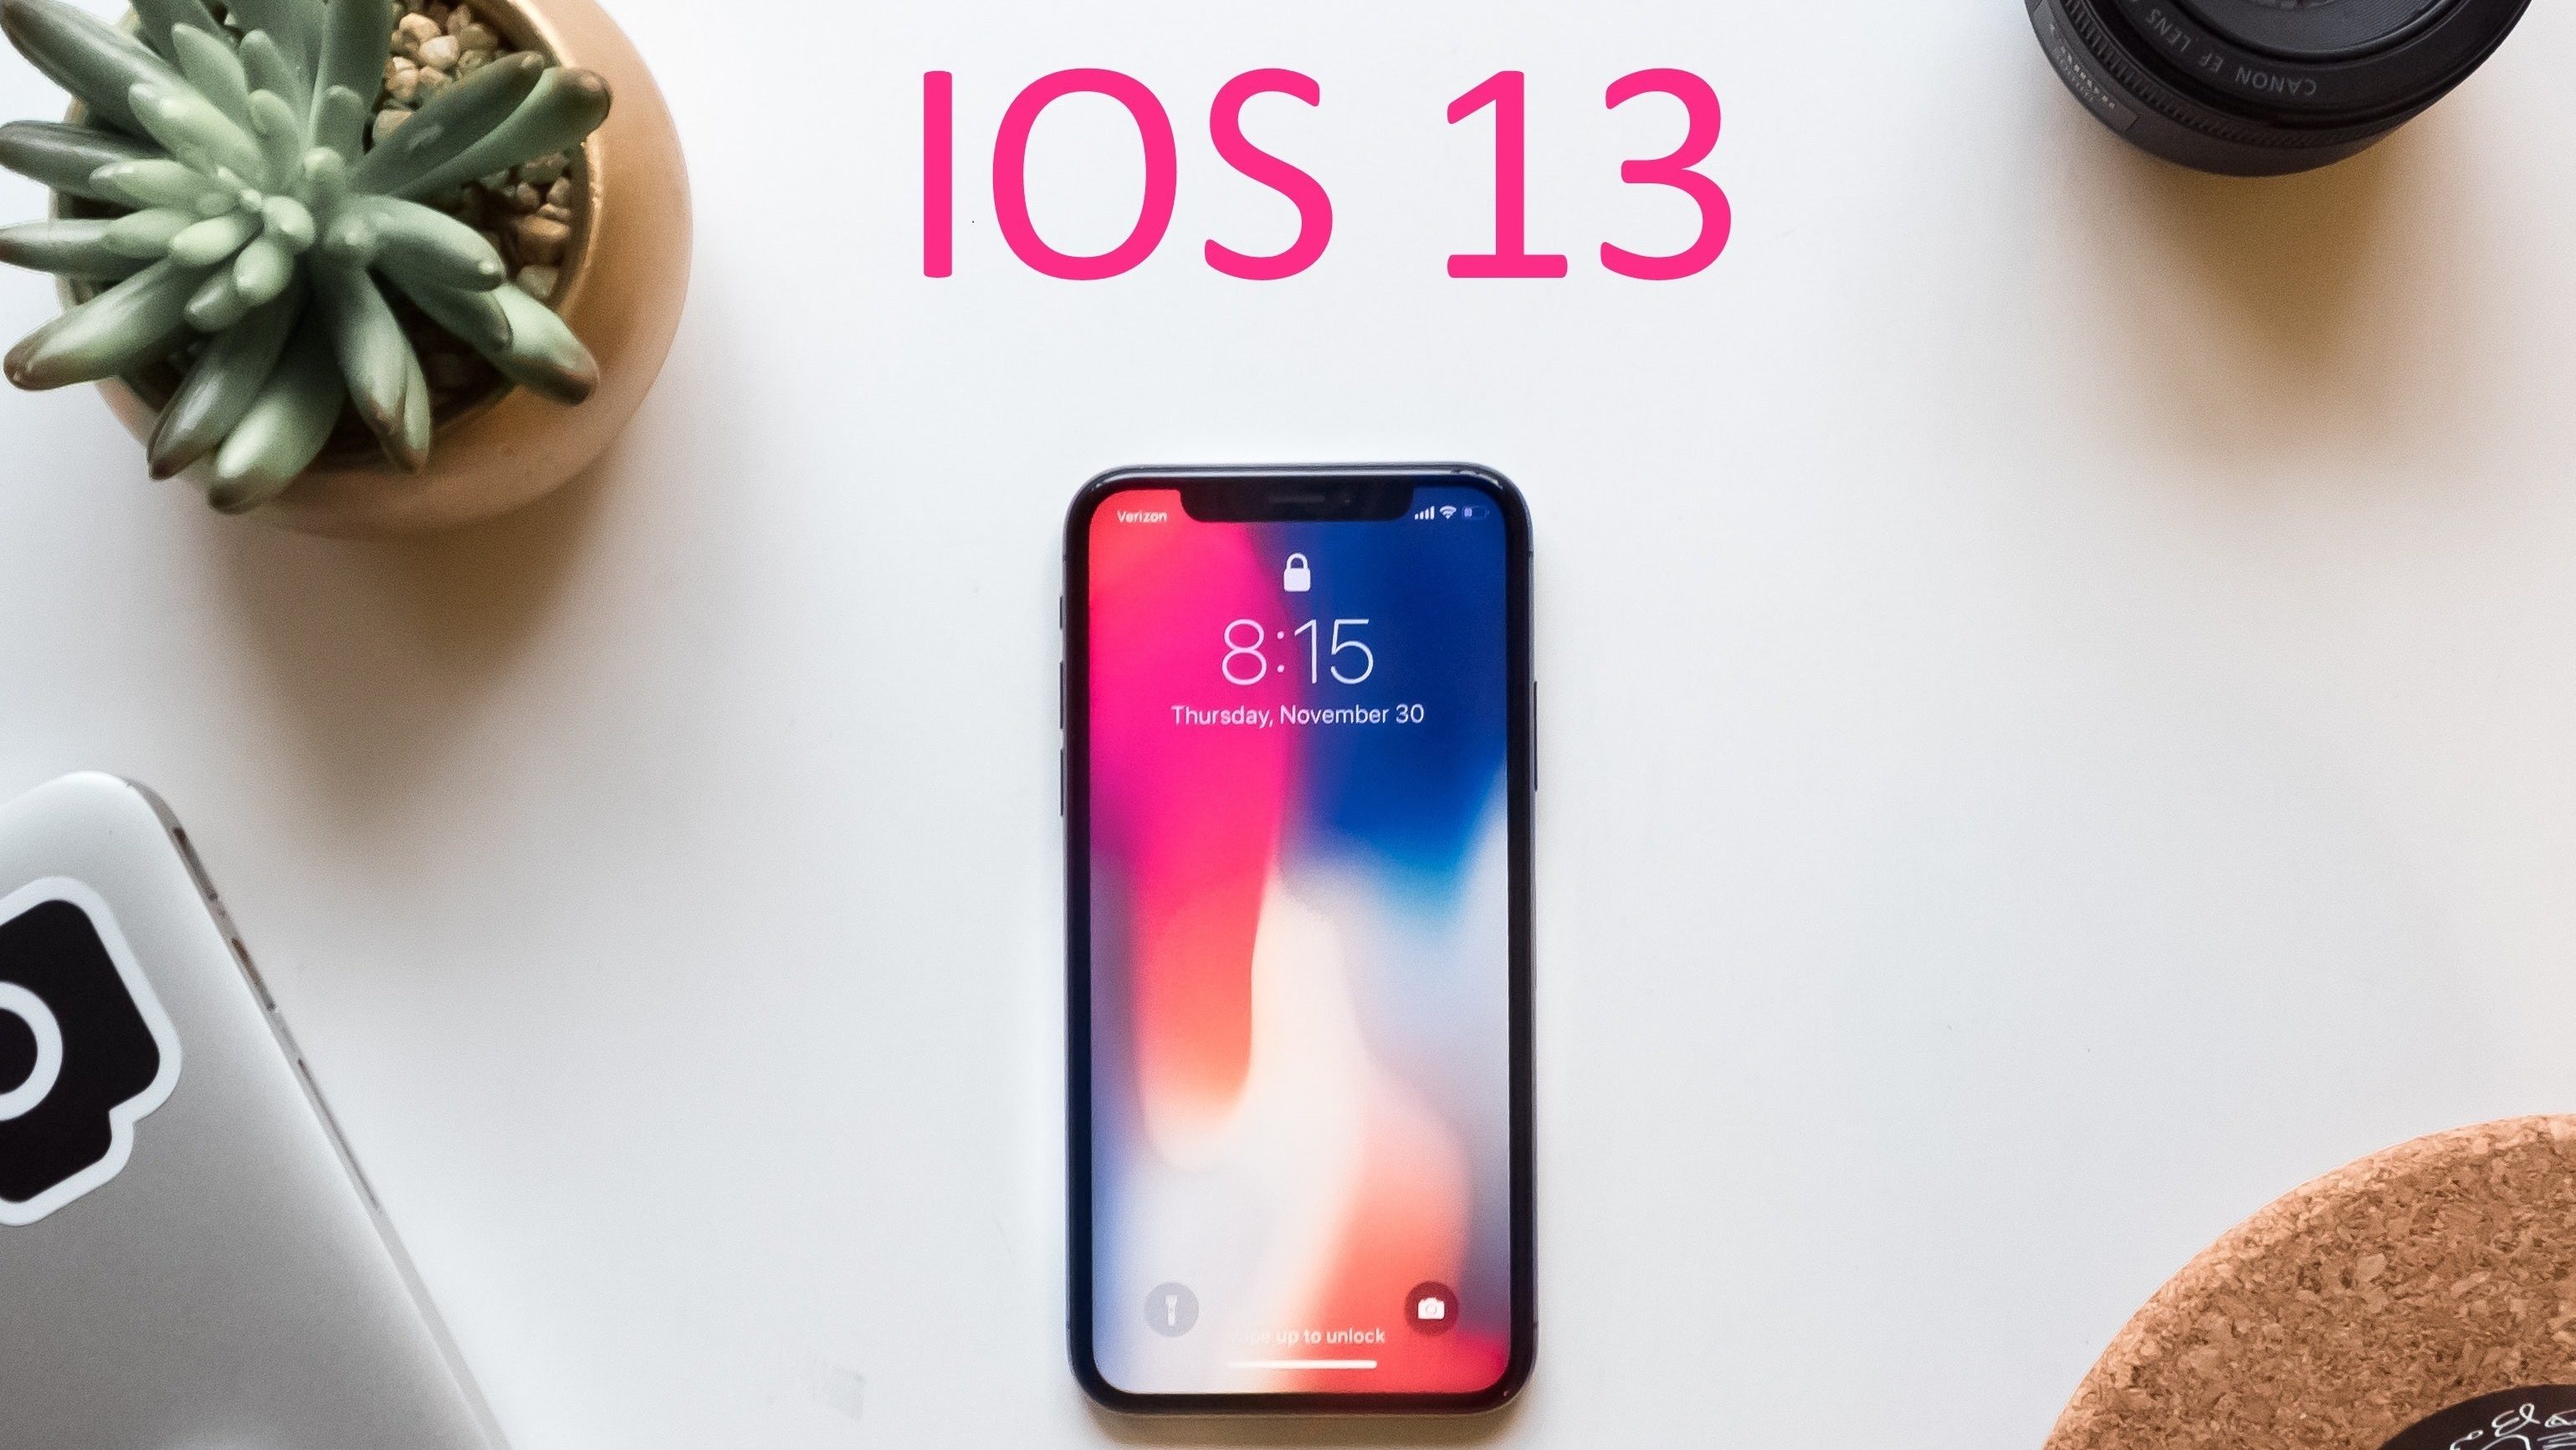 Apple iOS 13 update features release date